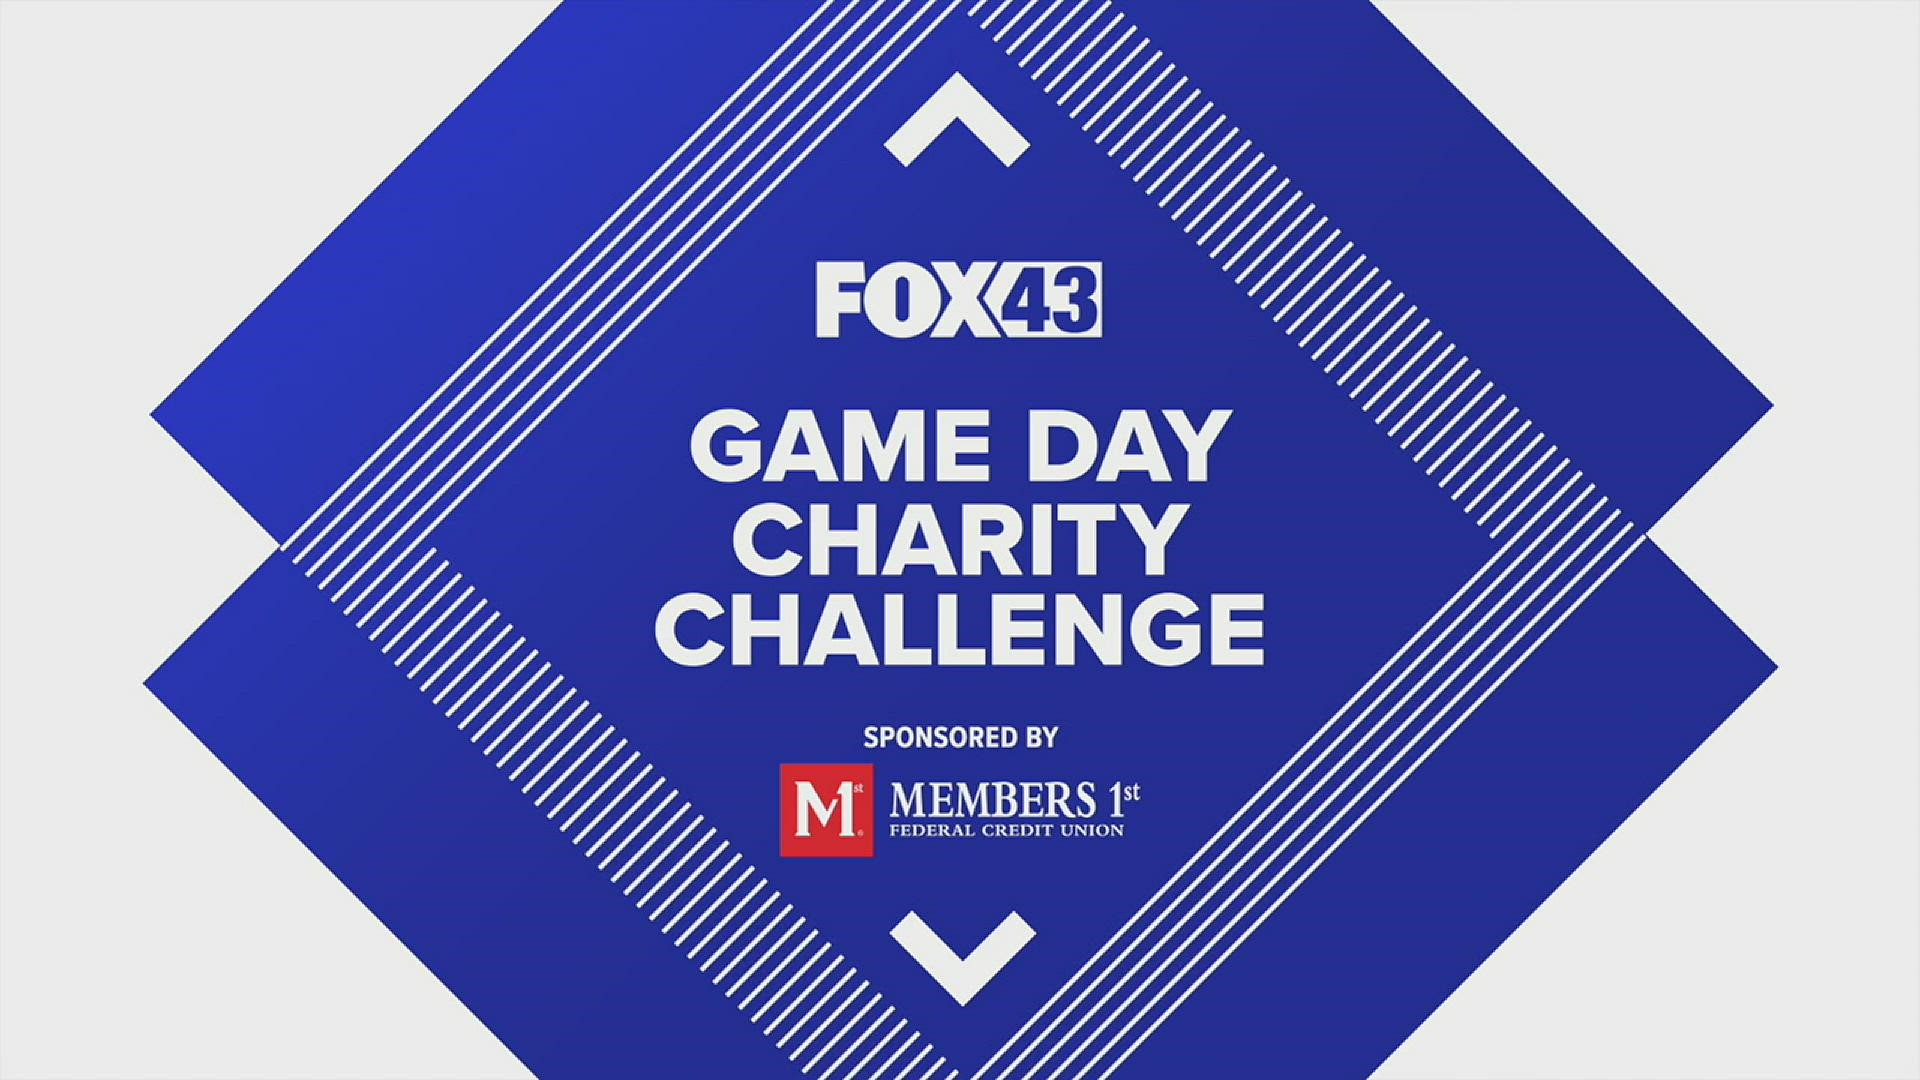 From Oct. 7 to Dec. 16, FOX43's Todd Sadowski and Members 1st's Mike Wilson will select the winner of each Thursday Night Football game.